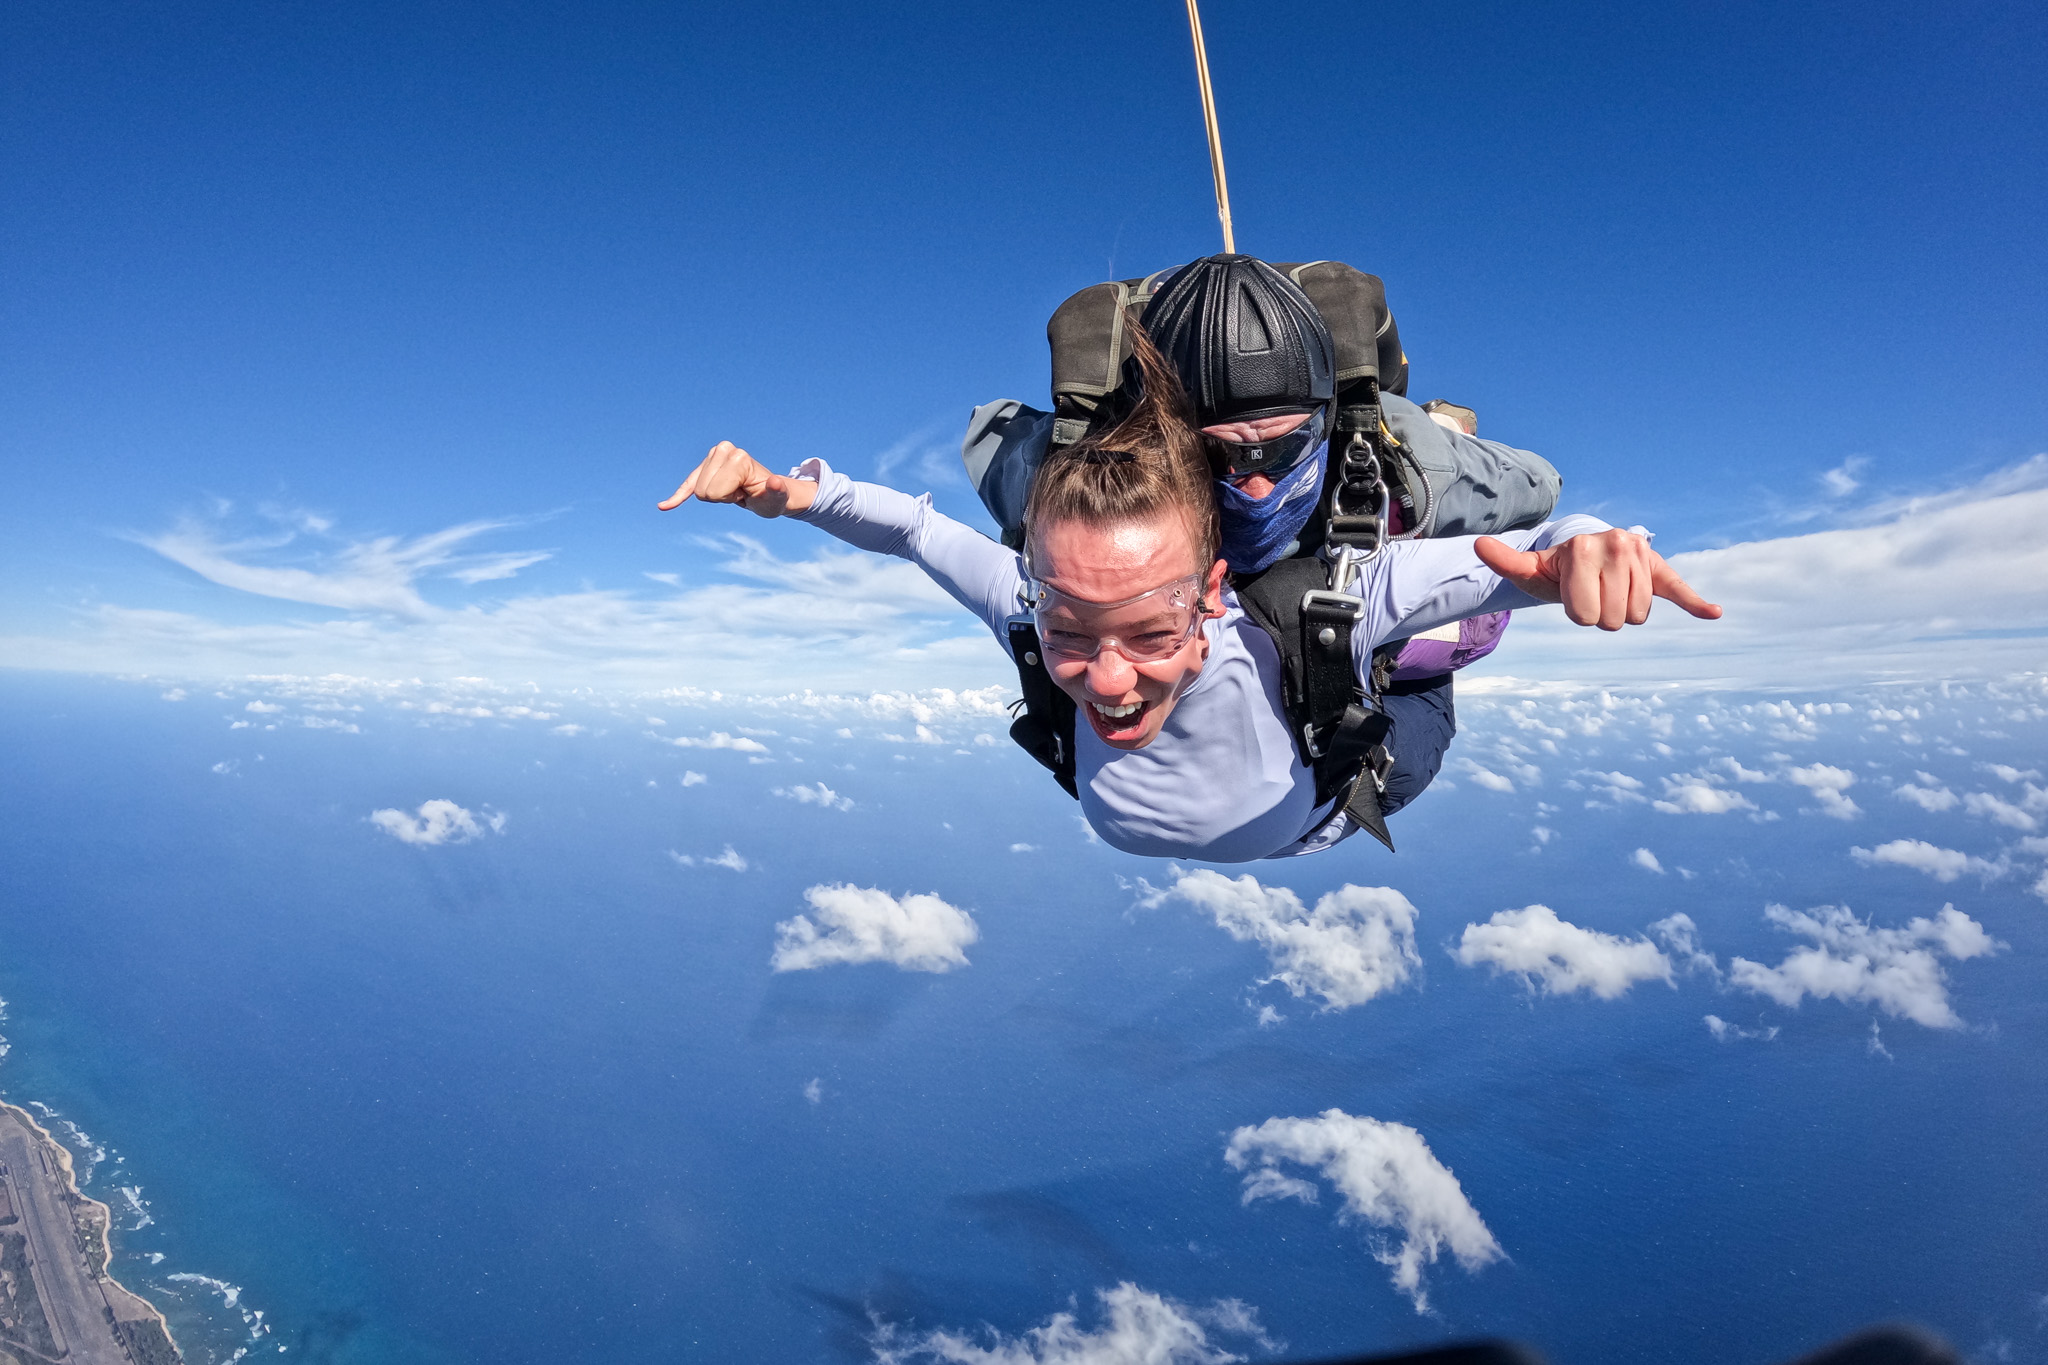 A woman smiles mid-air skydiving, surrounded by blue sky.